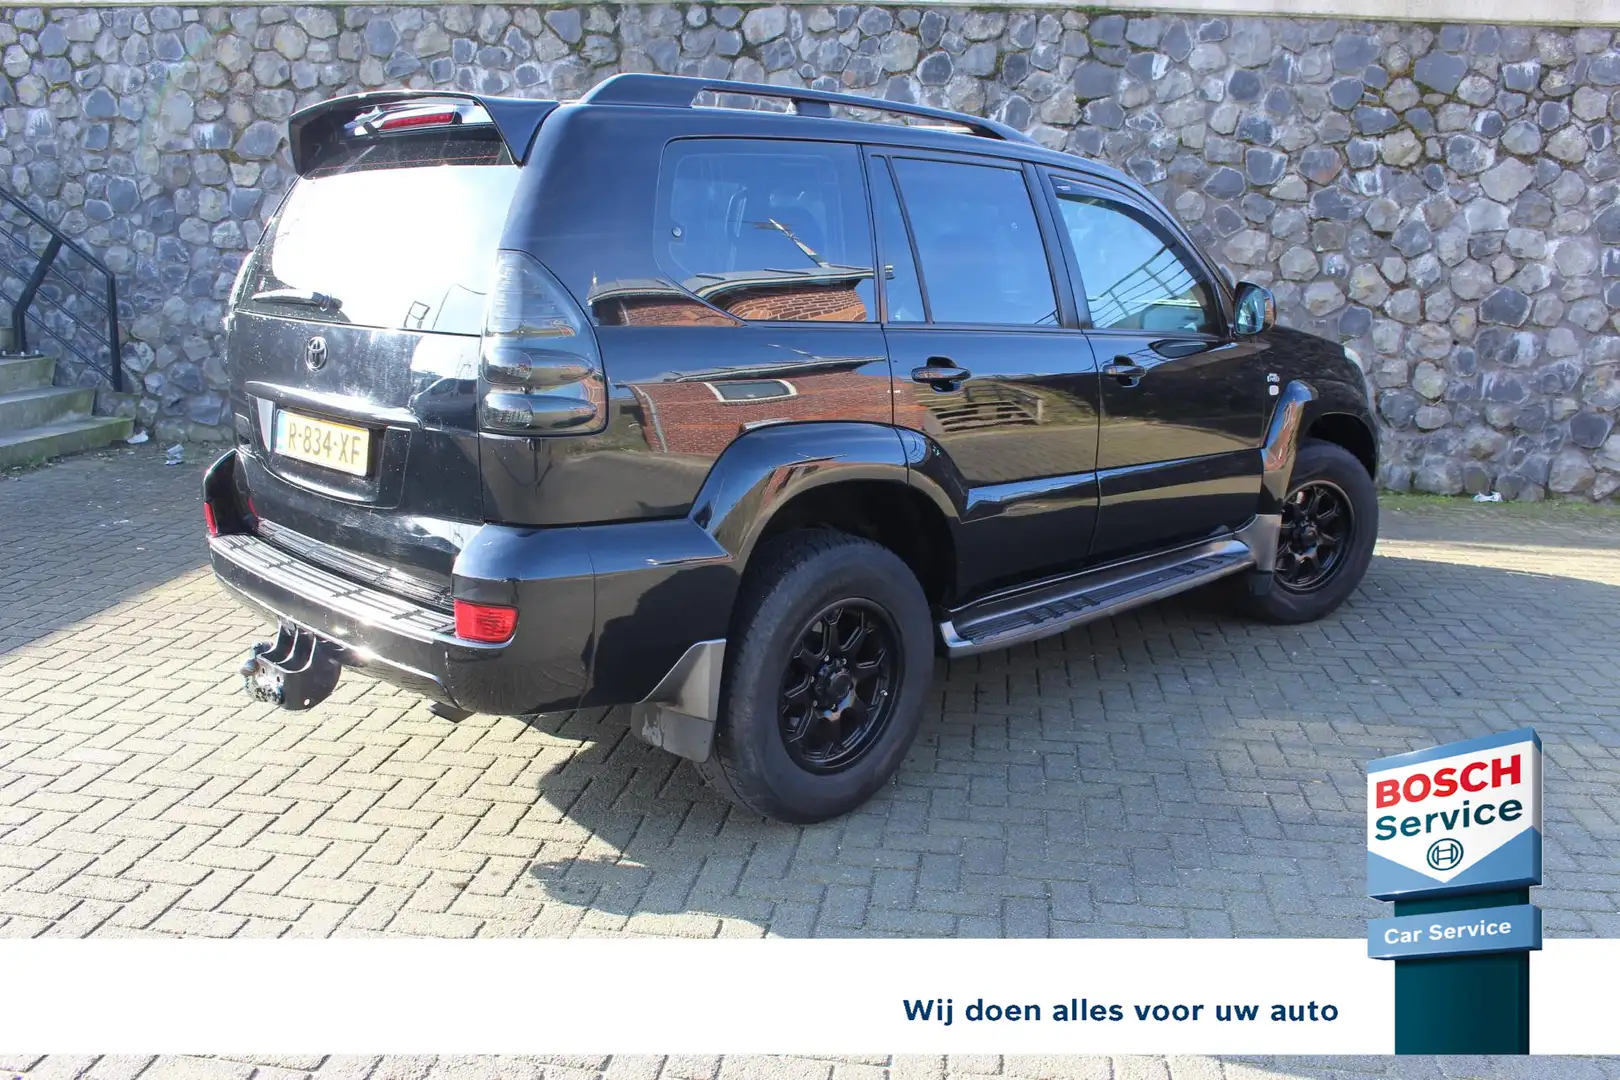 Toyota Land Cruiser 3.0 D-4D VX 5 pers Automaat Alle optie´s revisie v crna - 2